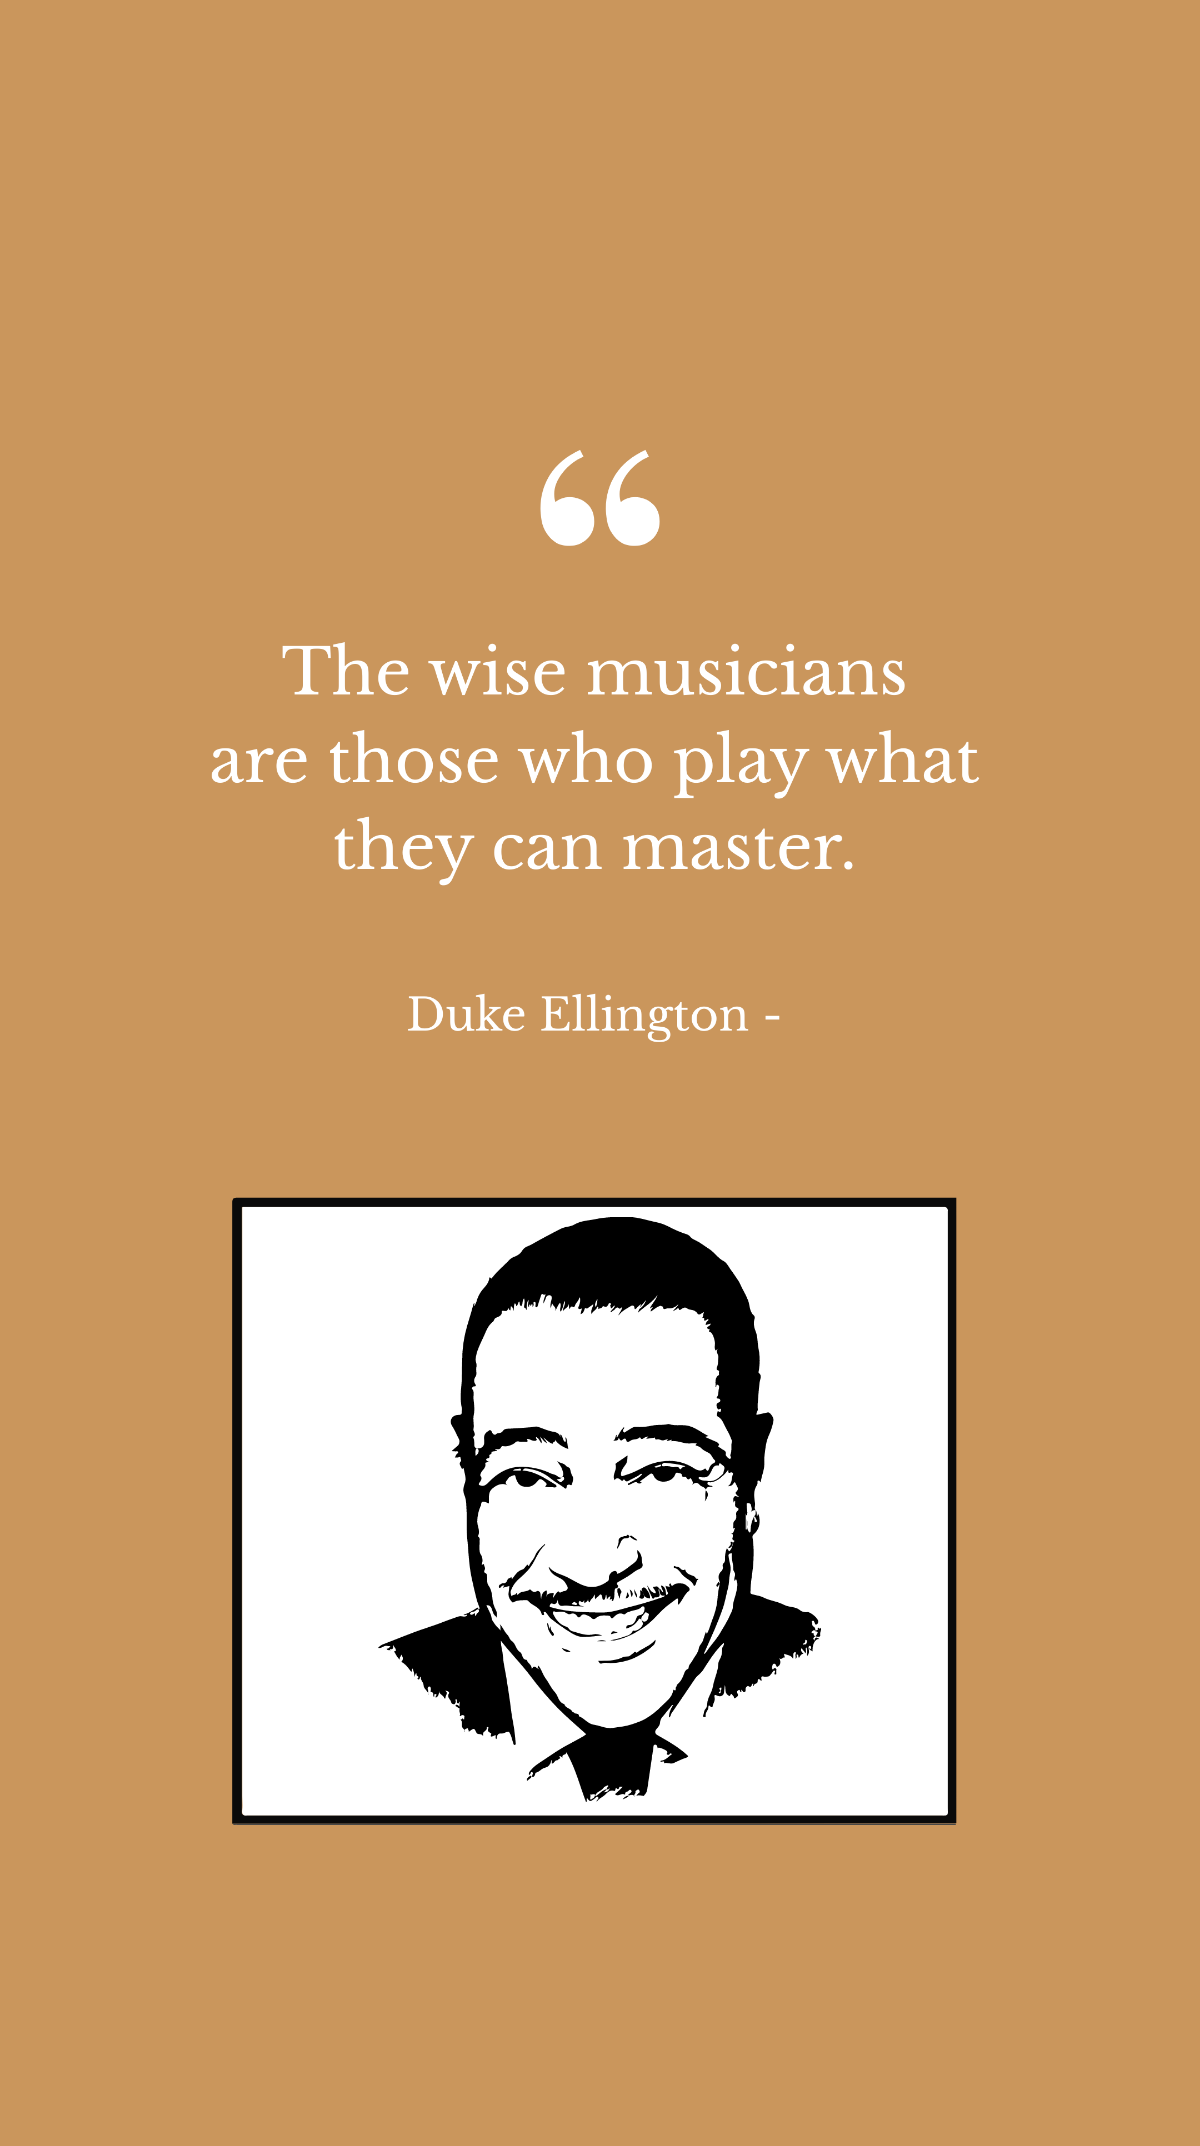 Duke Ellington - The wise musicians are those who play what they can master. Template